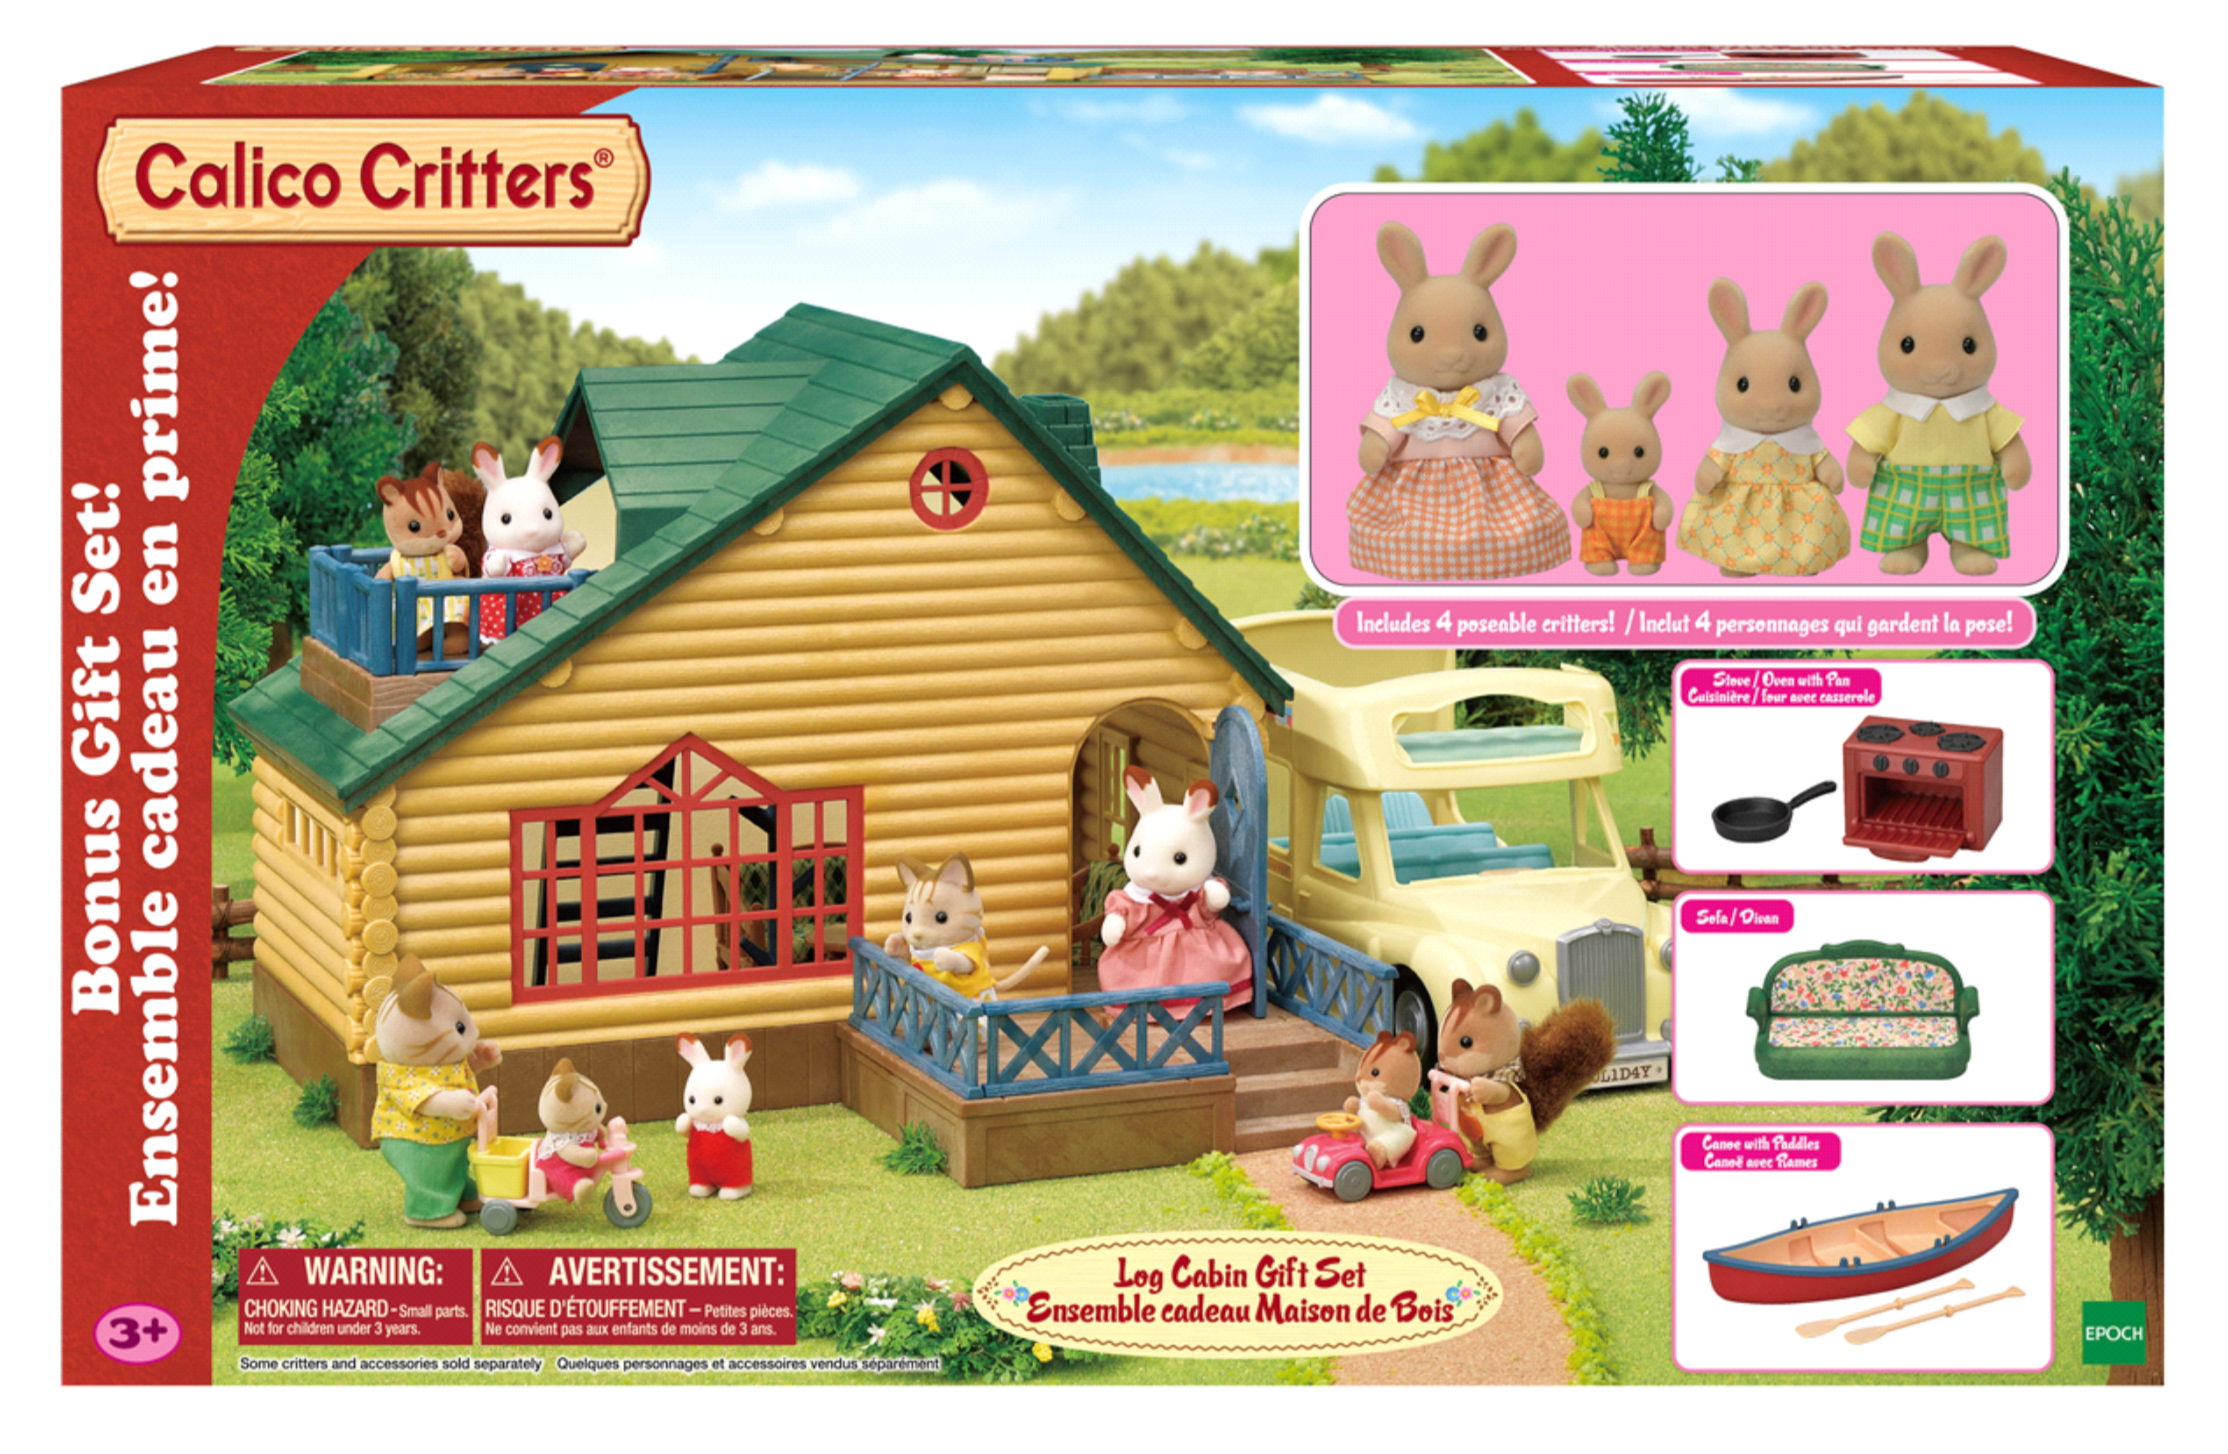 Calico Critters: Log Cabin Gift Set